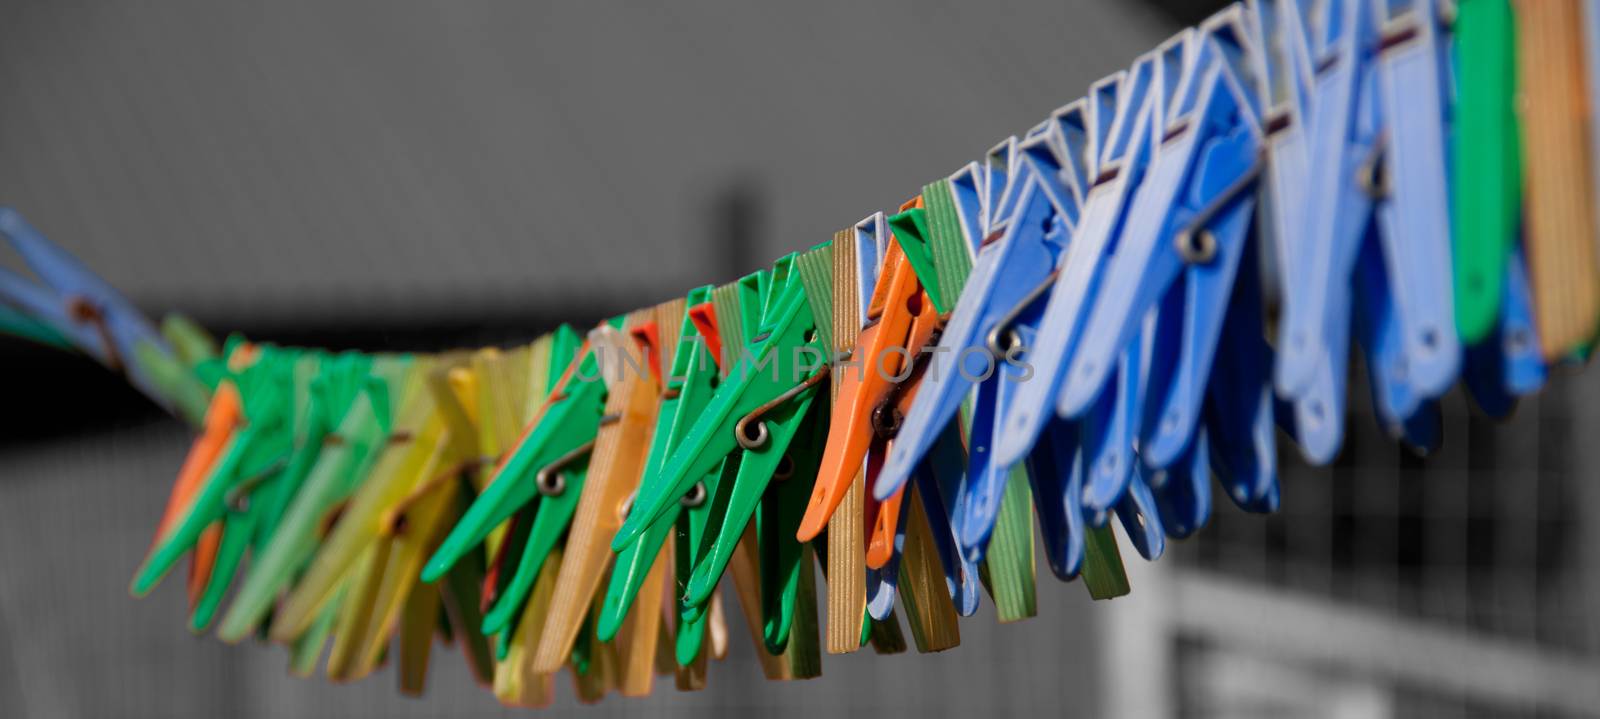 Different color clothespins by leorantala